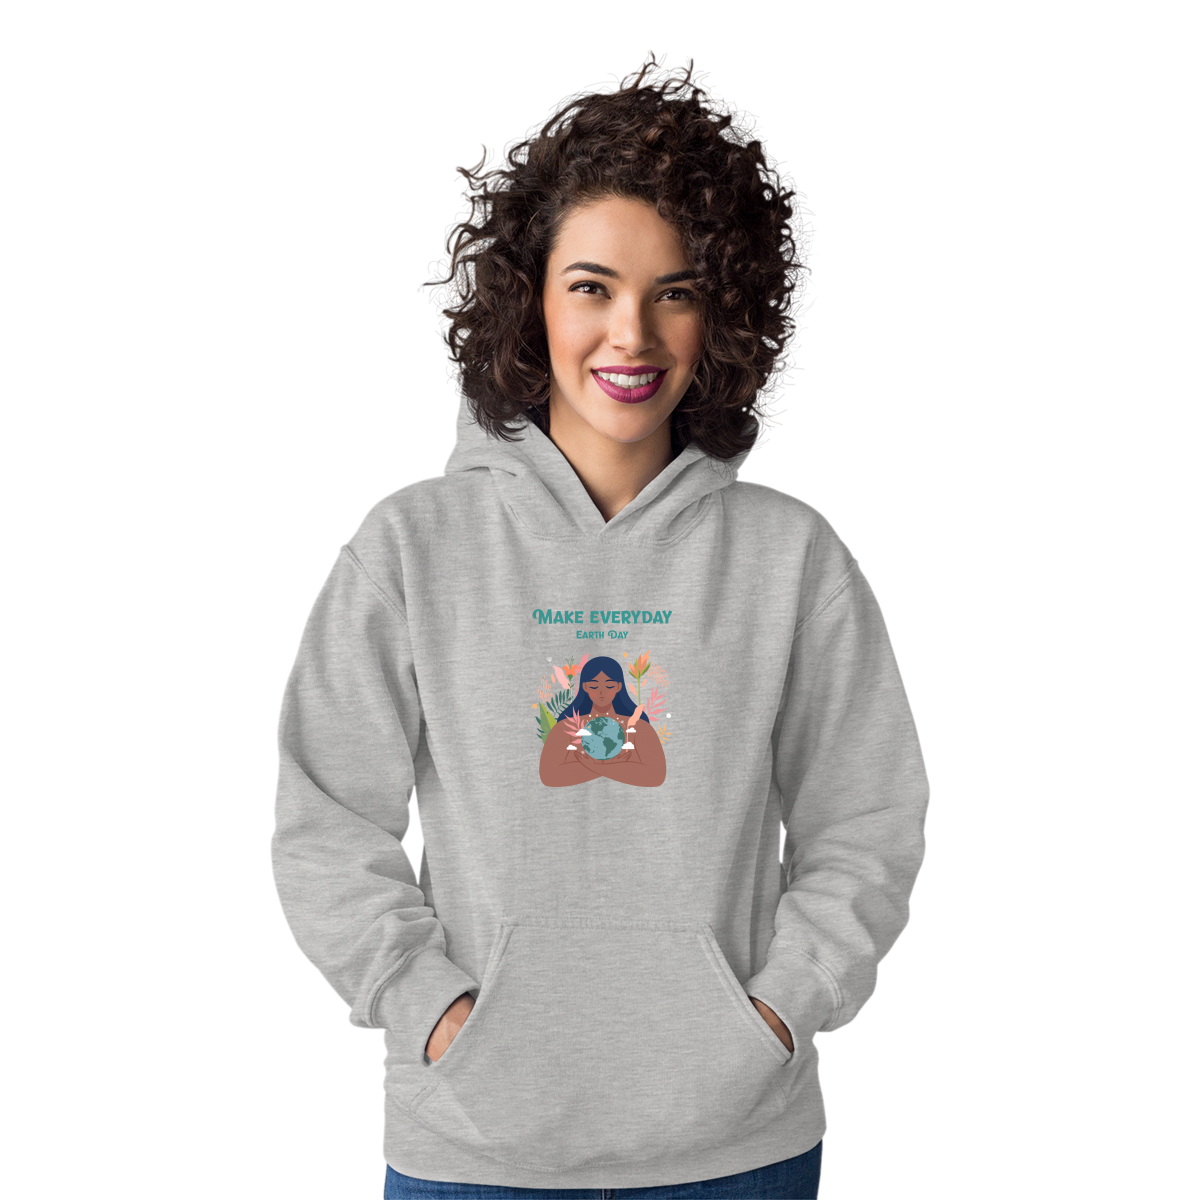 Earth Day Everyday Unisex Hoodie | Gray